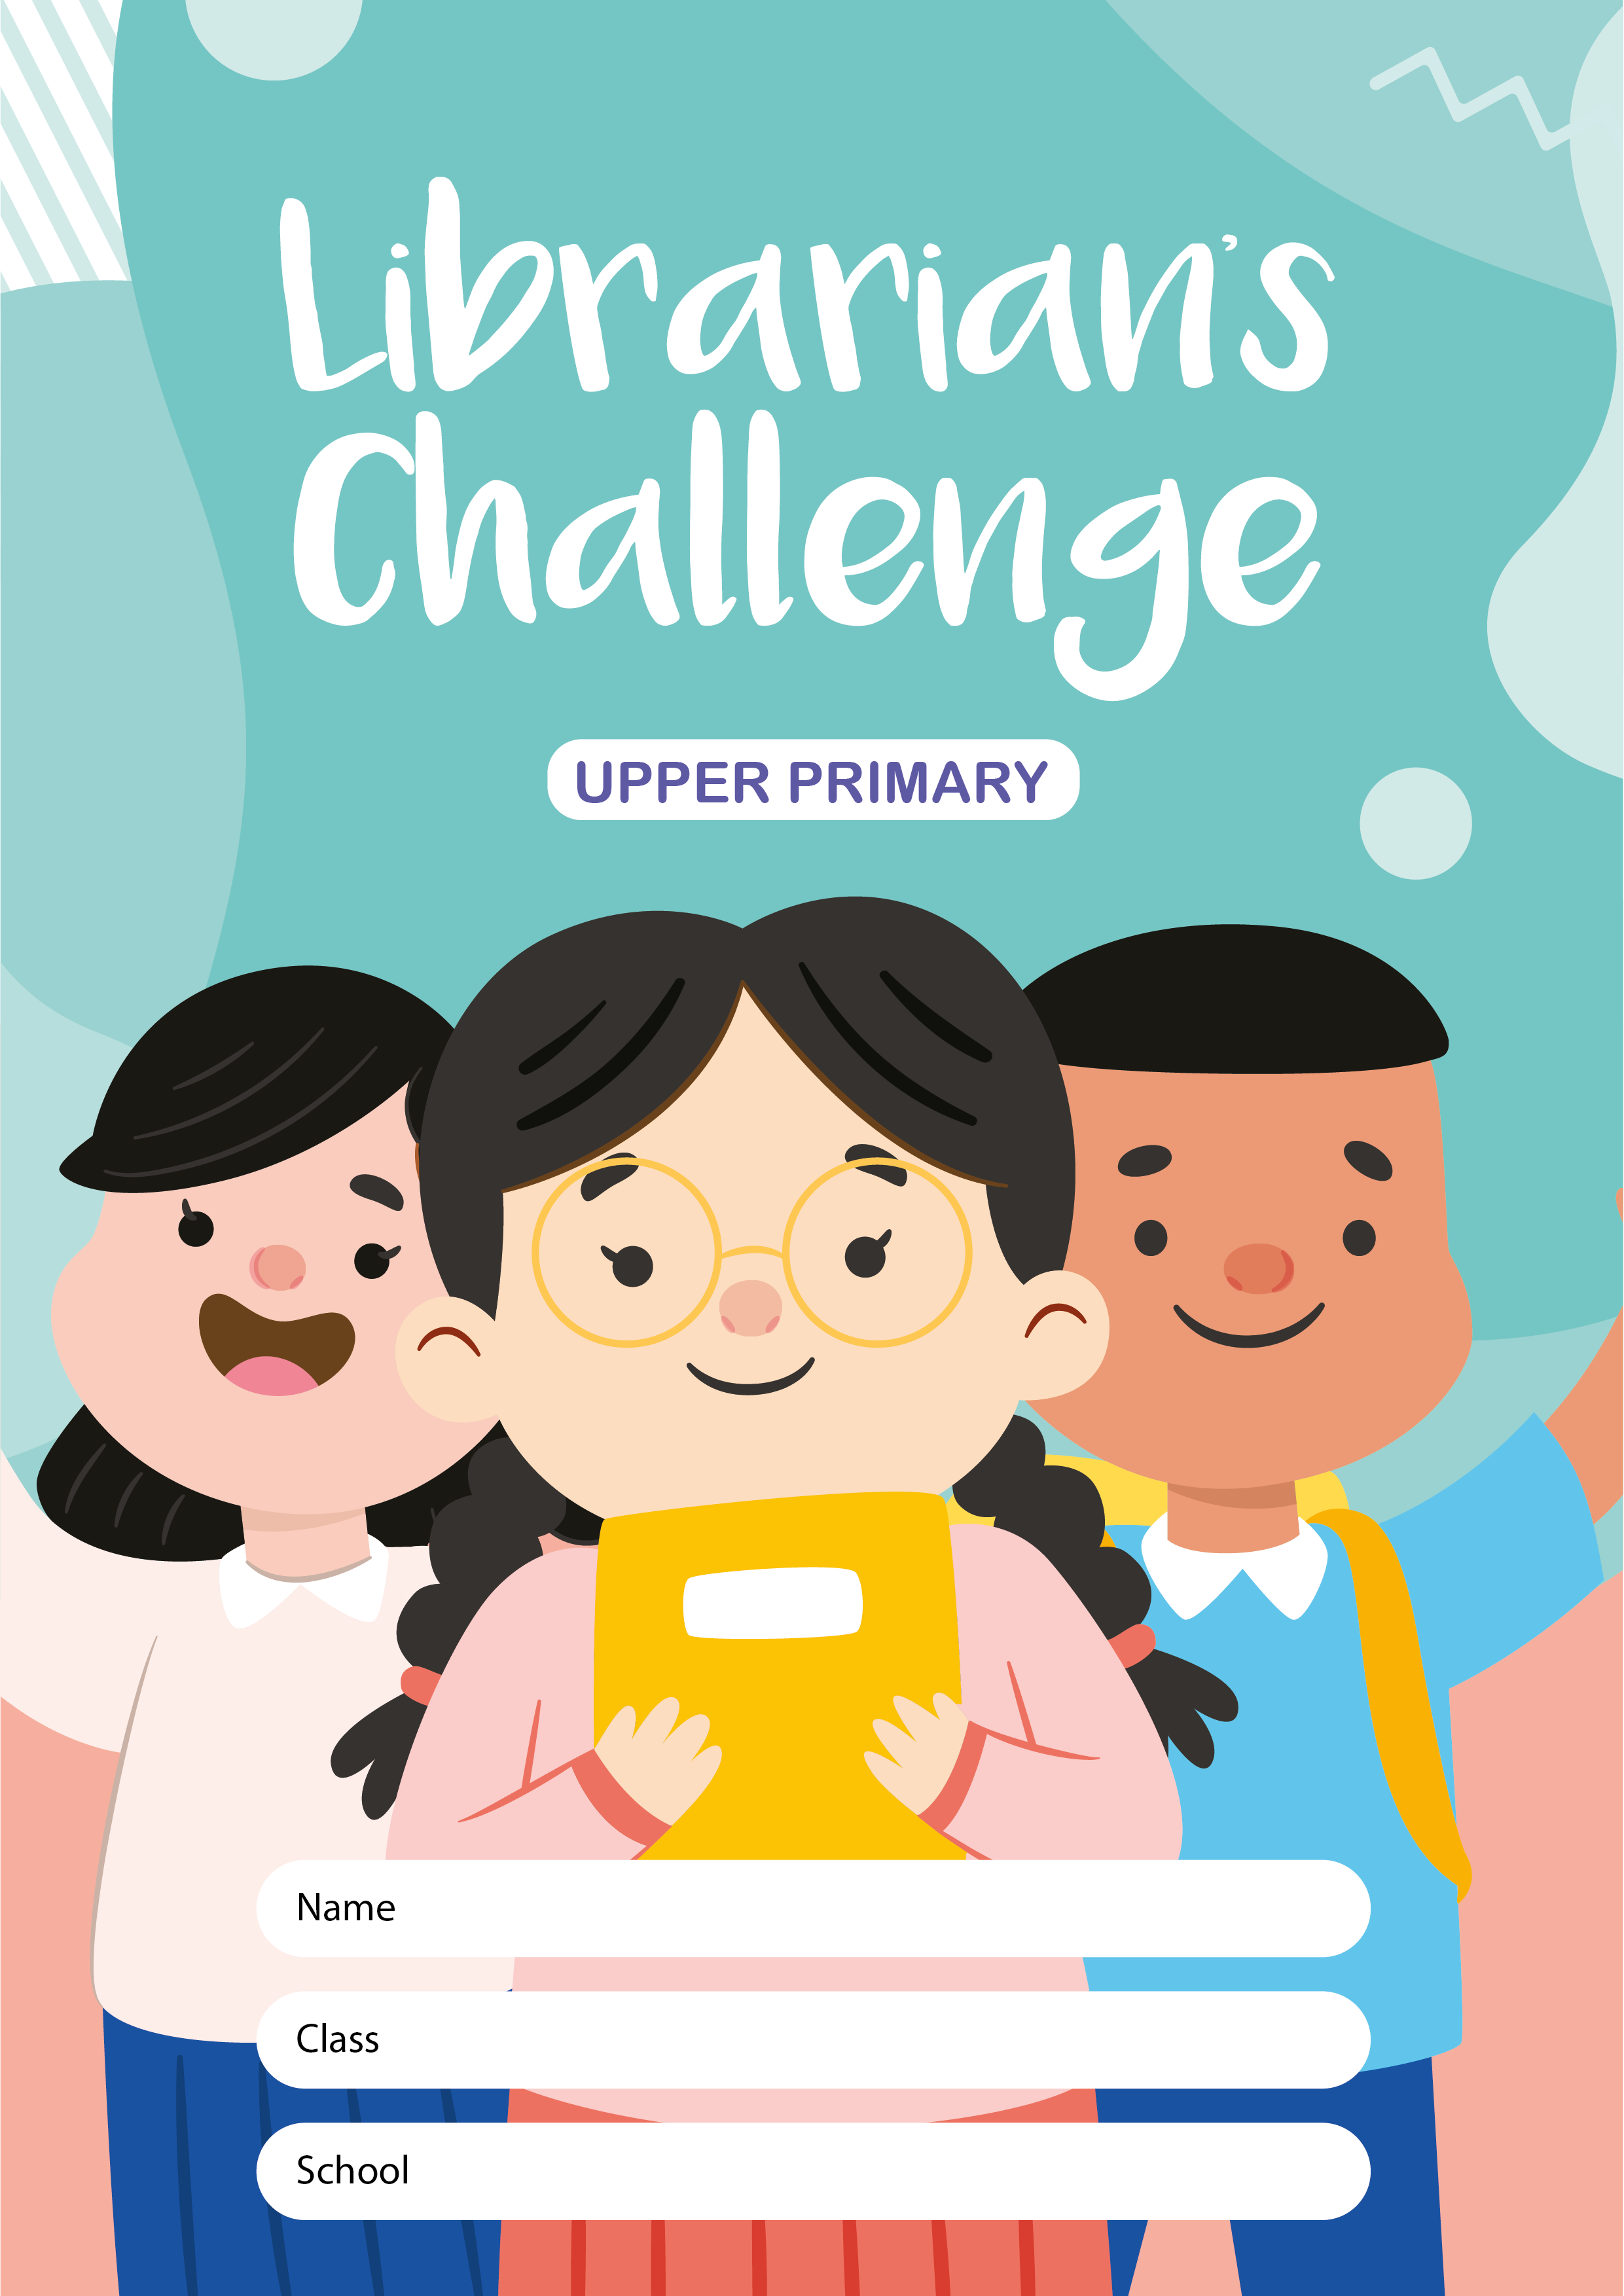 Lower Primary Librarian's Challenge 2021